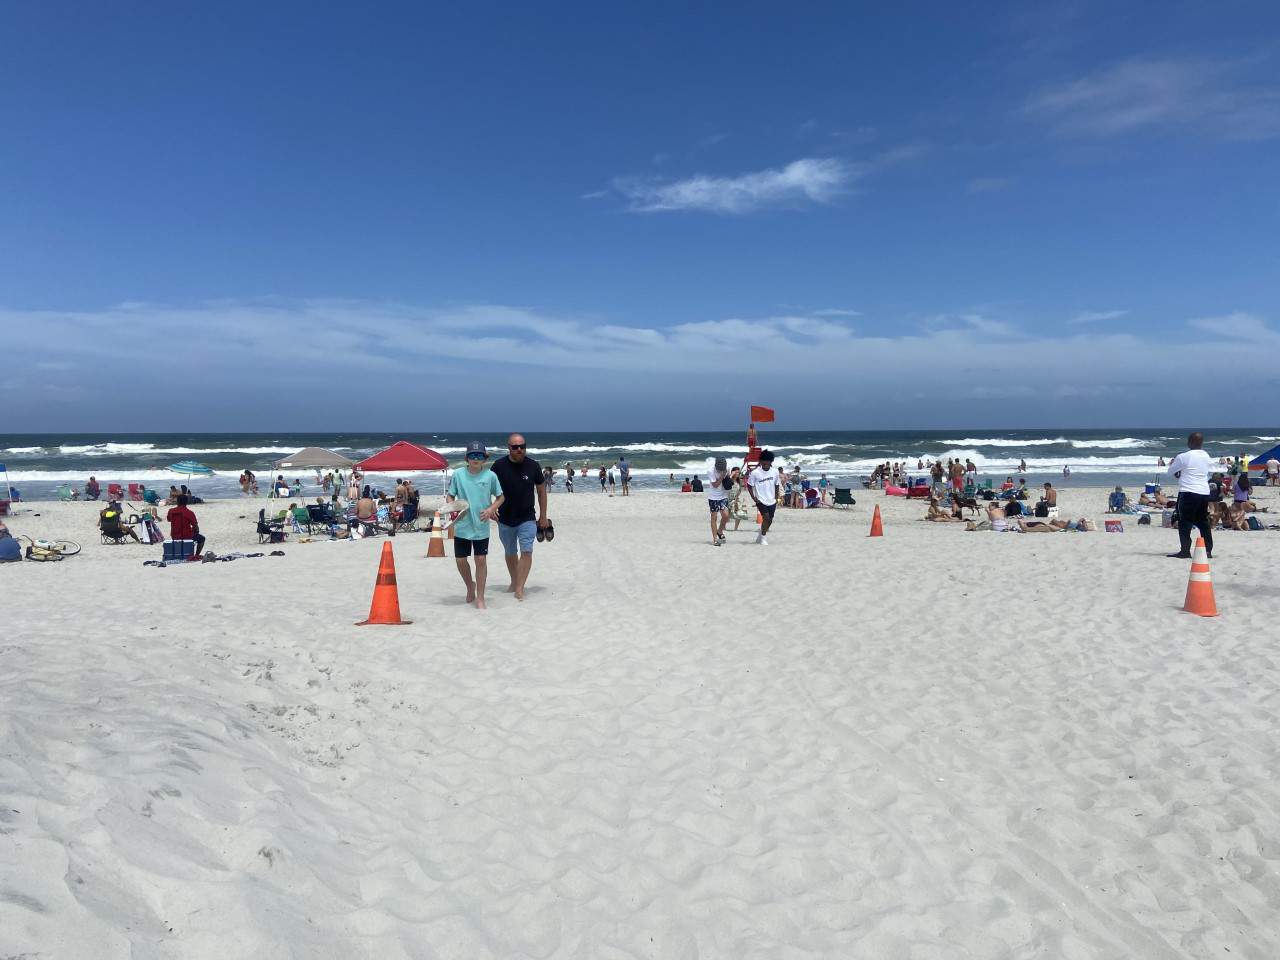 Police: Teen, adult rescued from rip current near Neptune Beach